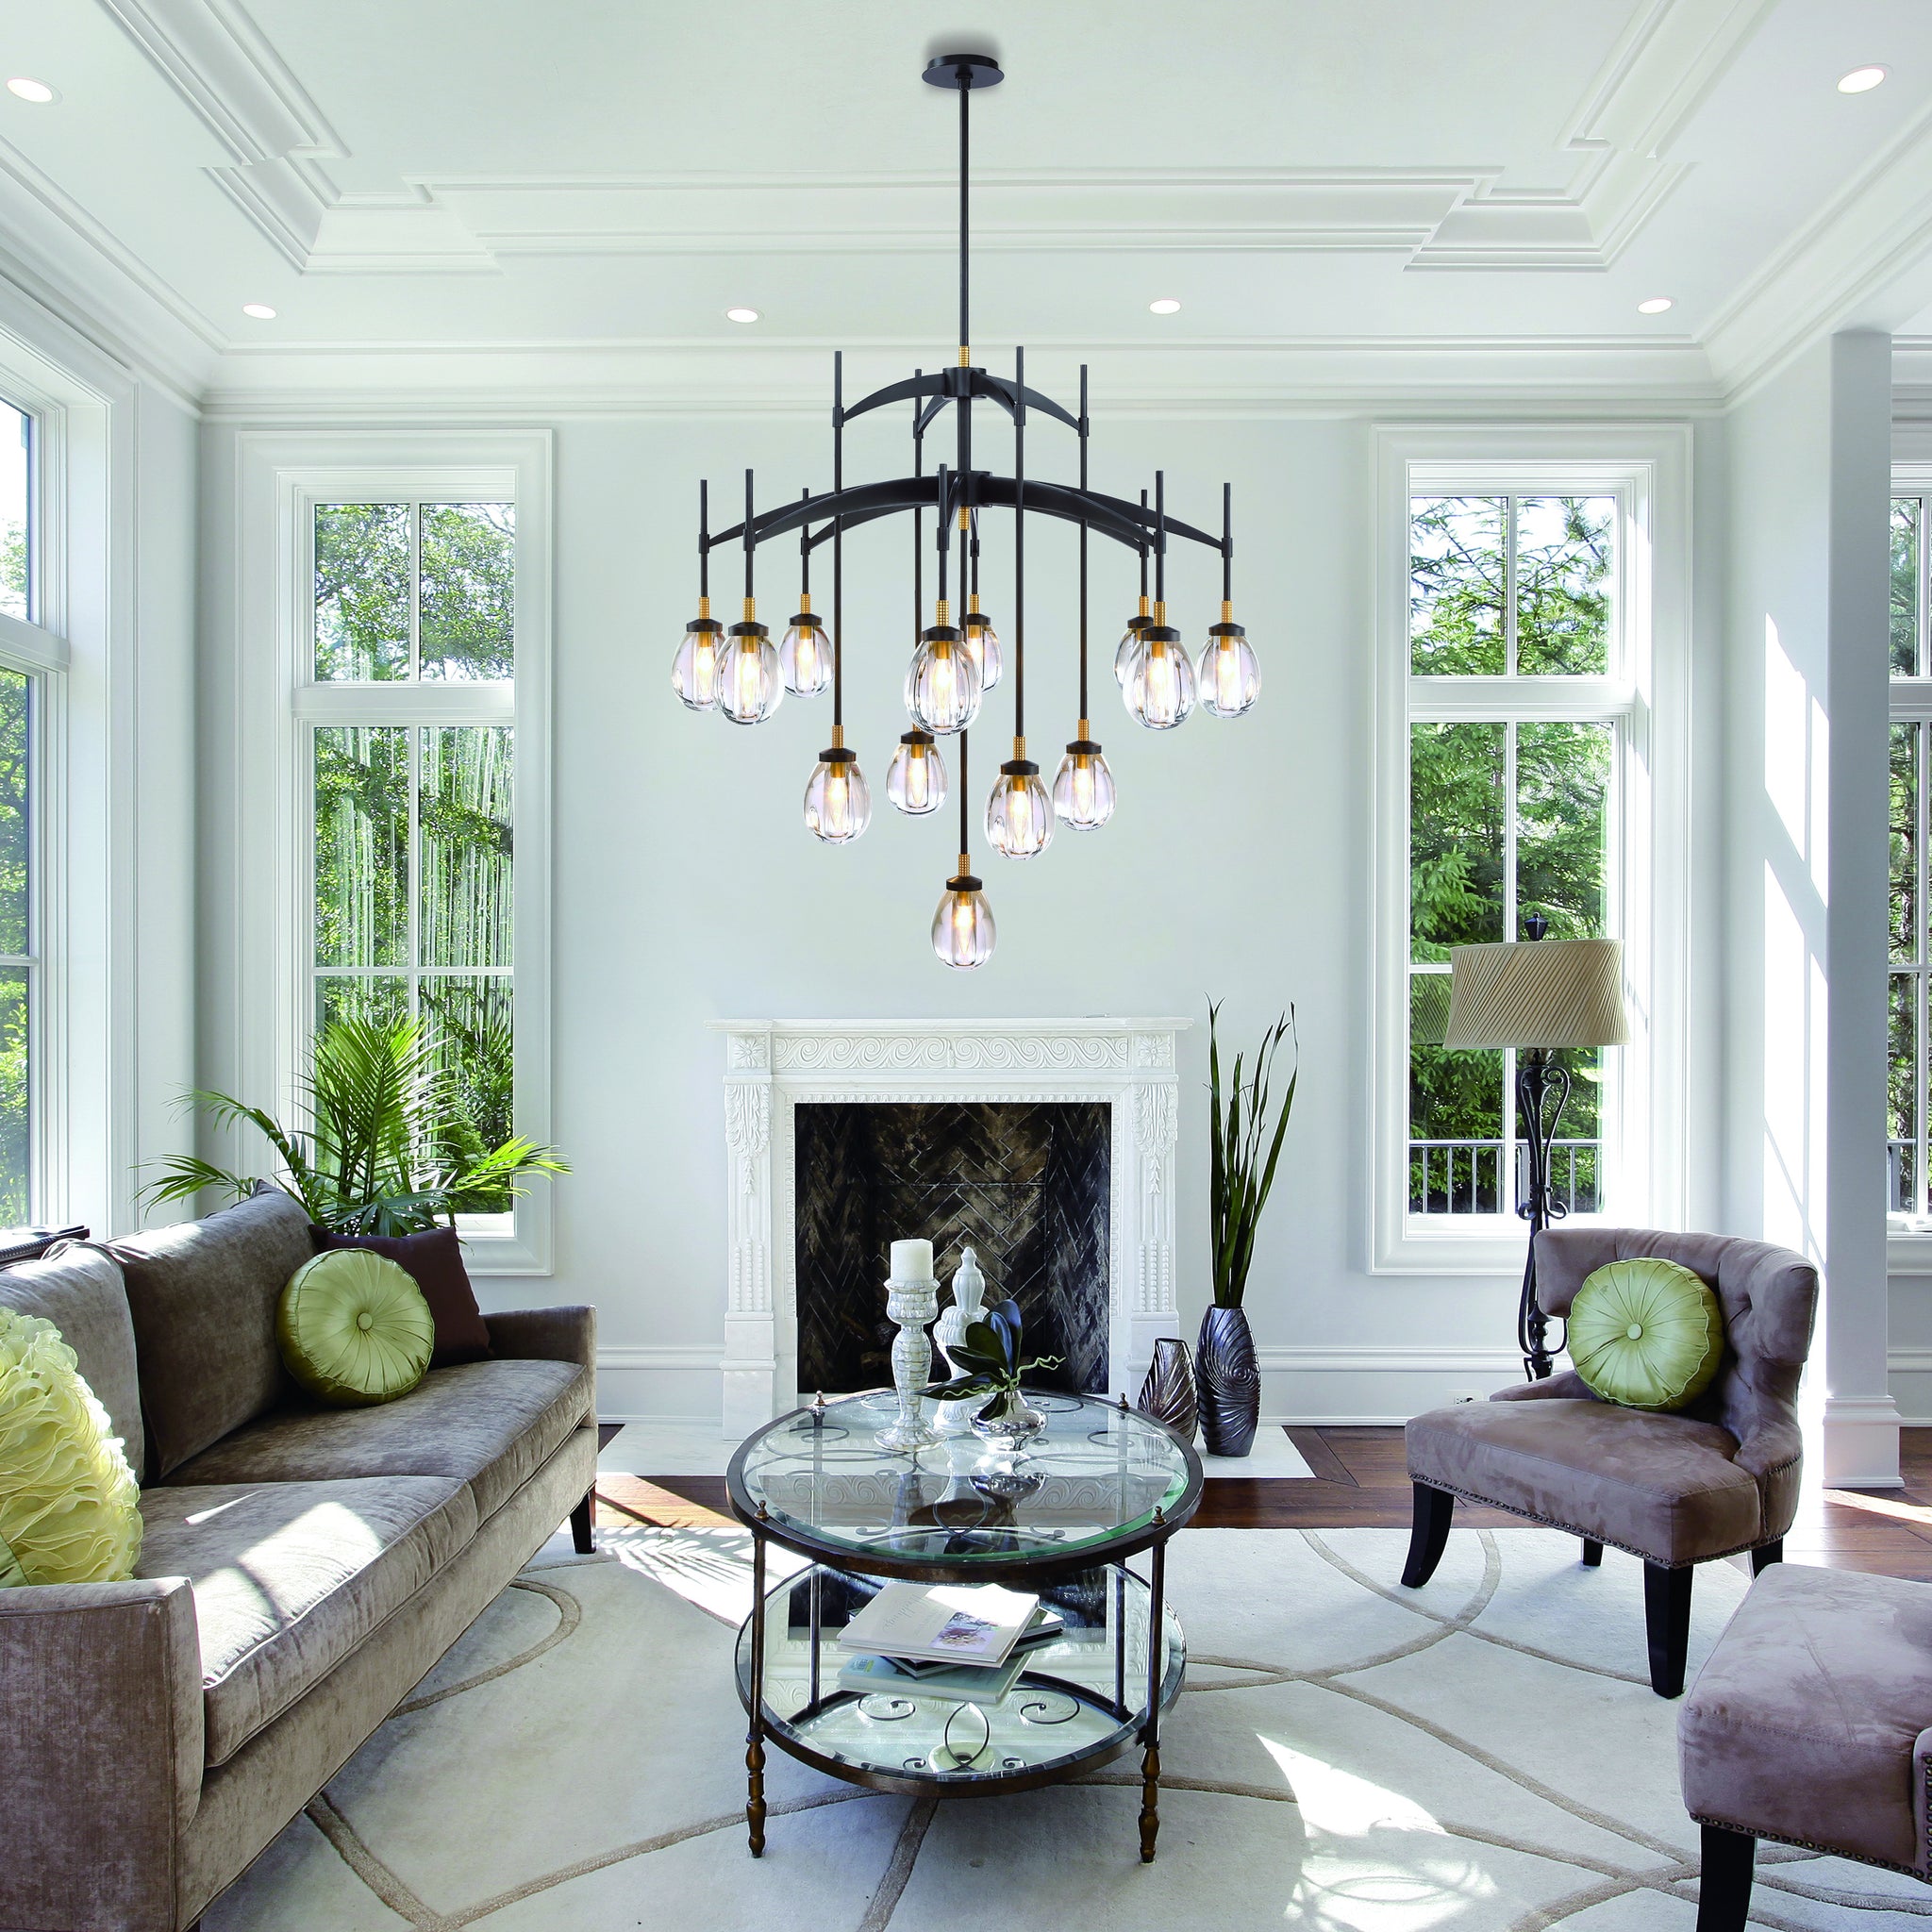 Illuminating Excellence: Your Source for Wholesale Lighting Fixtures